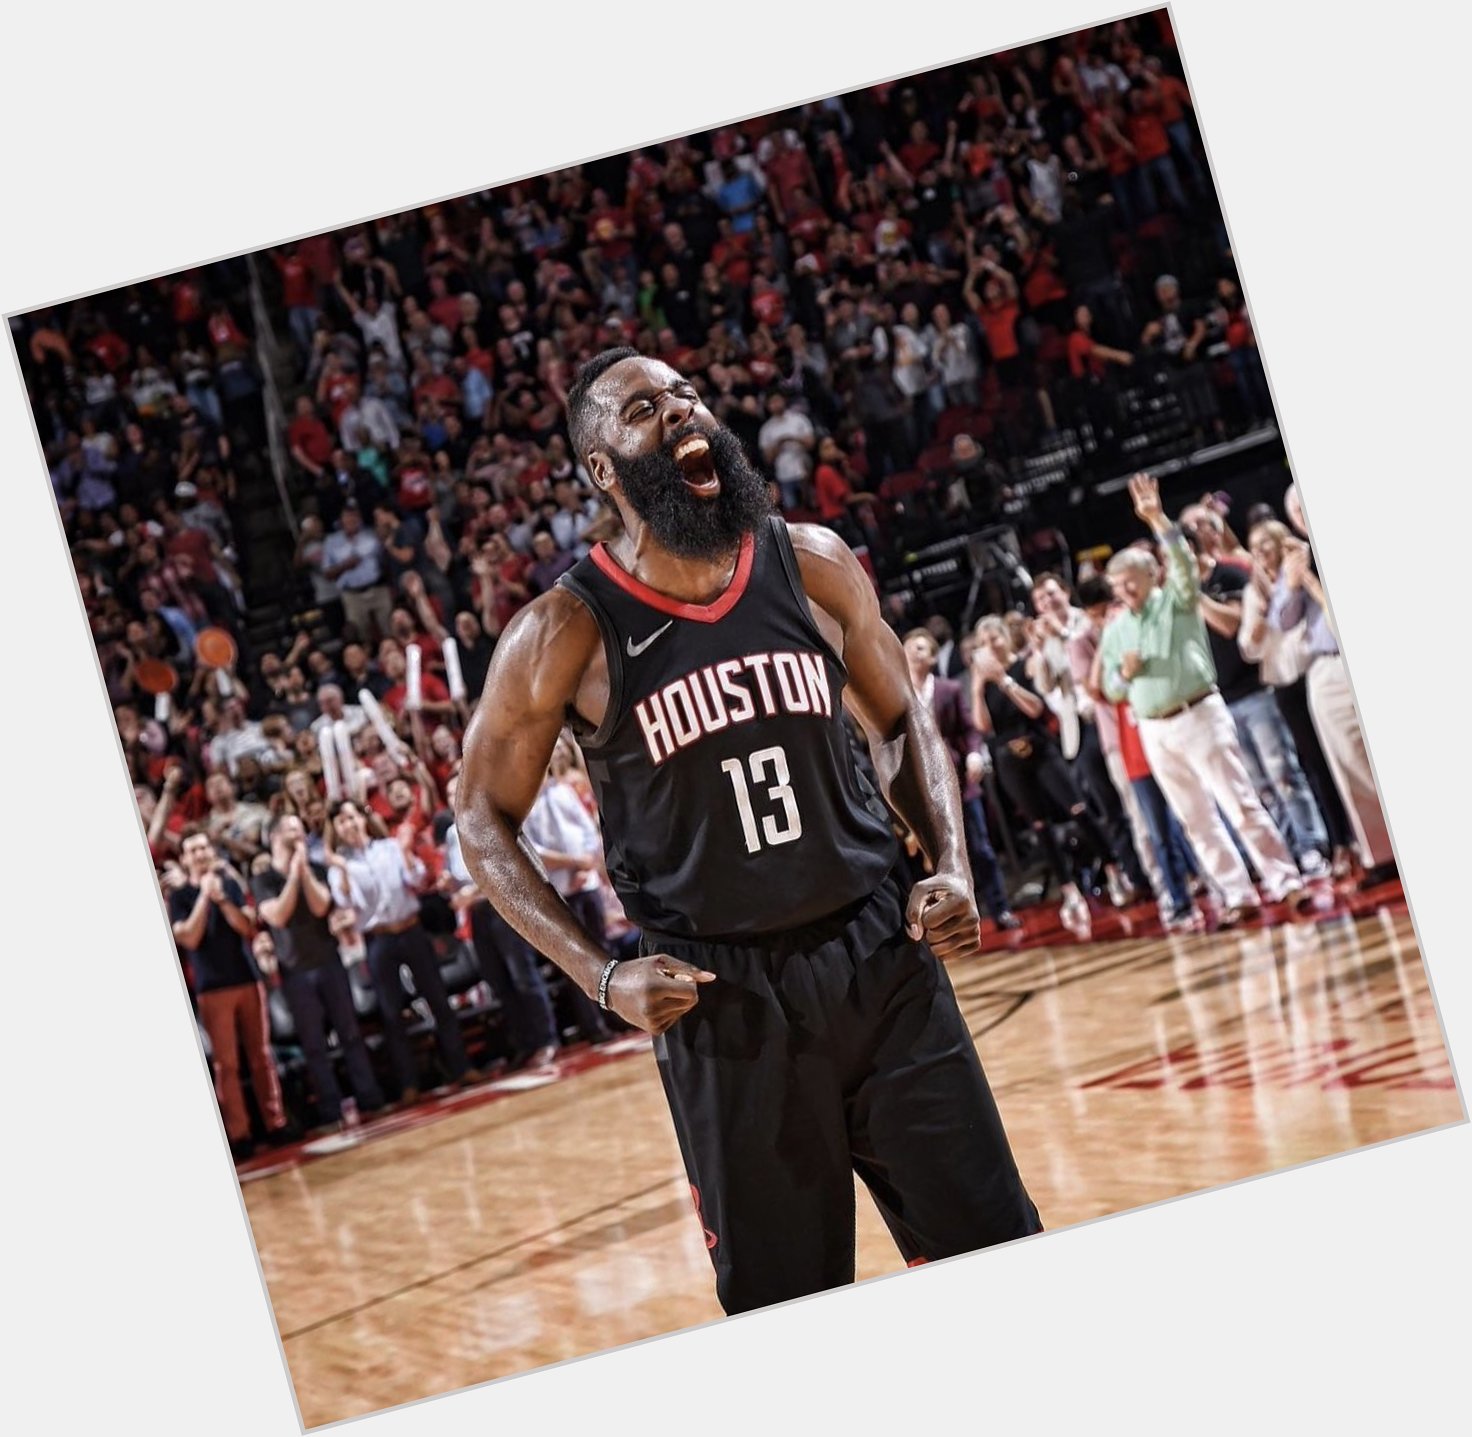 Happy birthday to the one and only James Harden!   